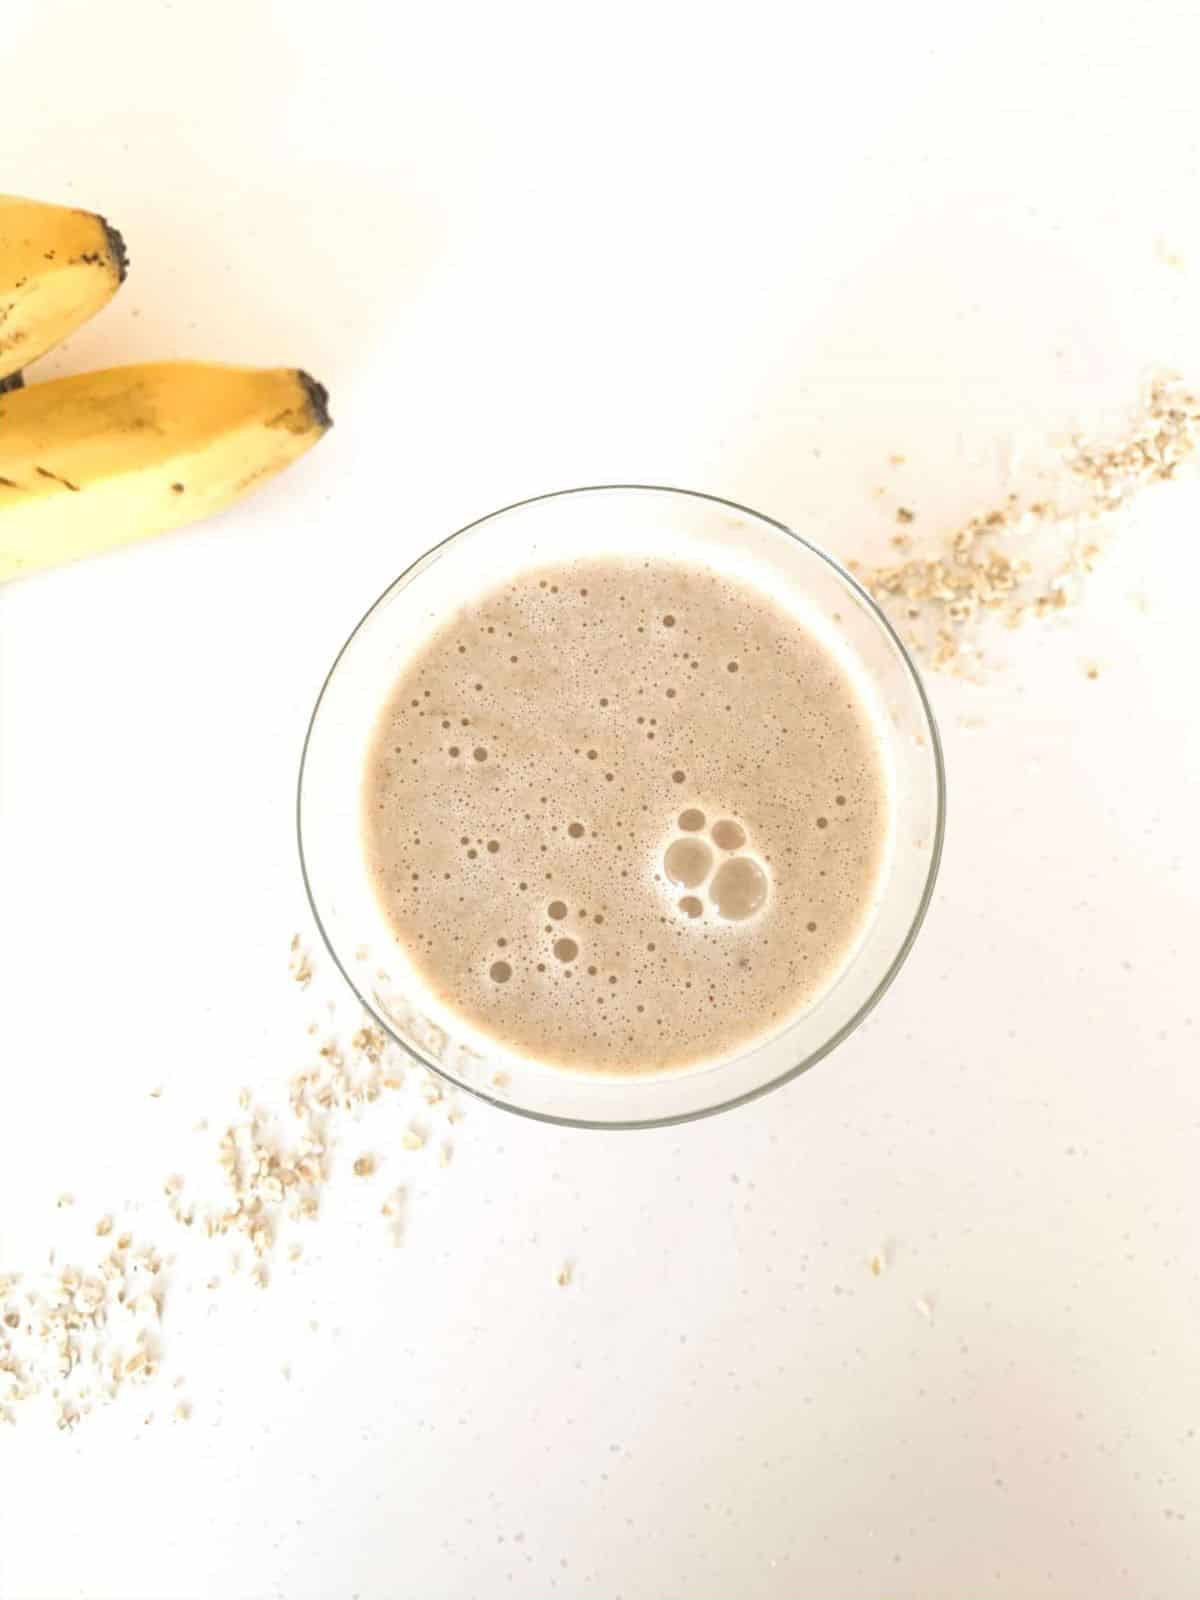 Glass with a beige-colored smoothie and 2 bananas on the side